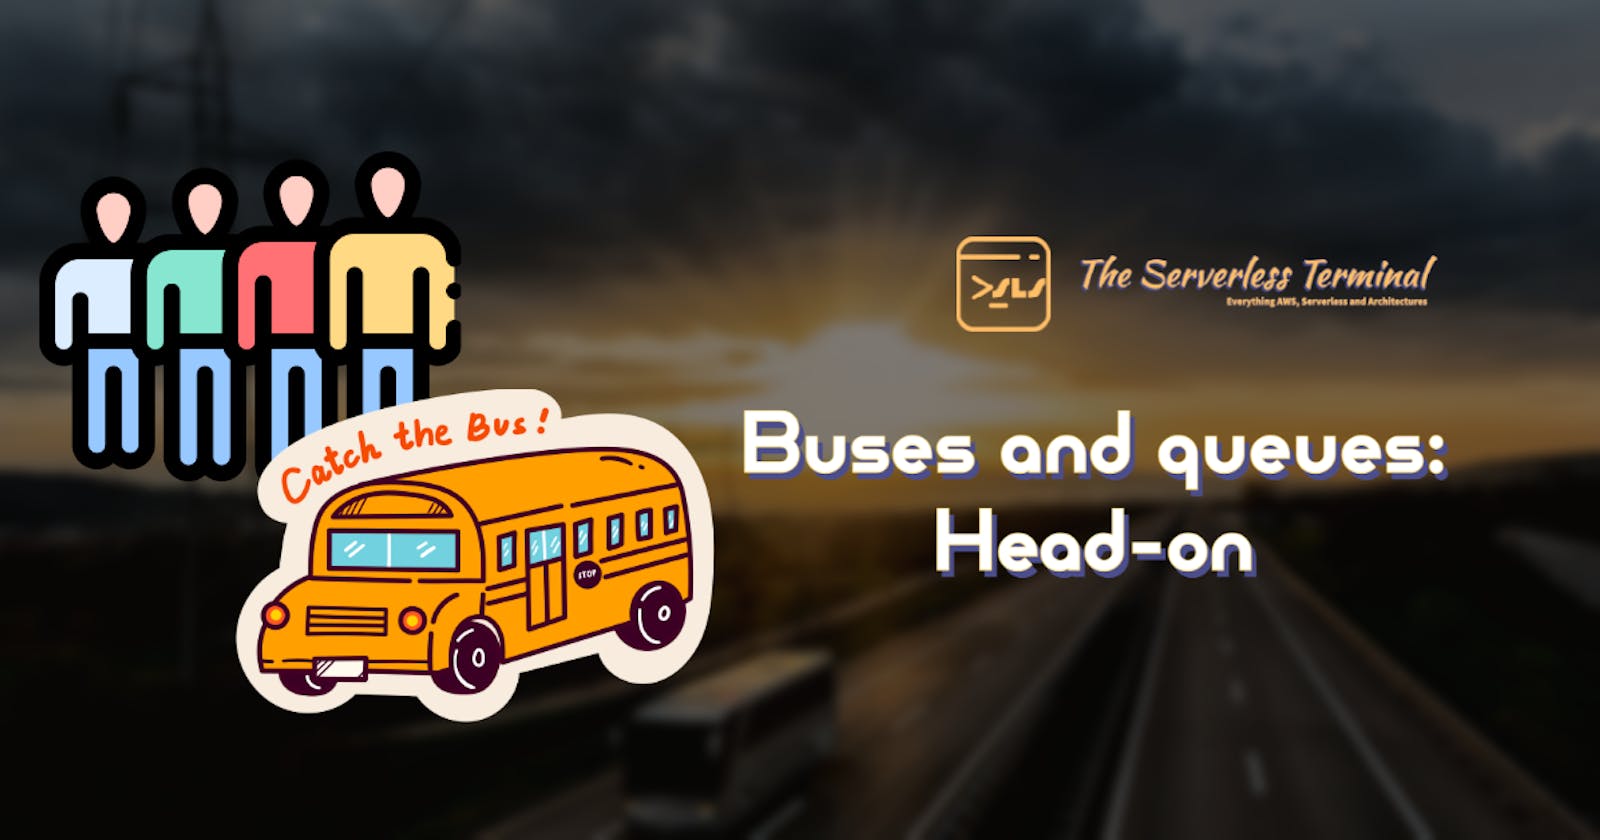 Buses and queues: Head-on